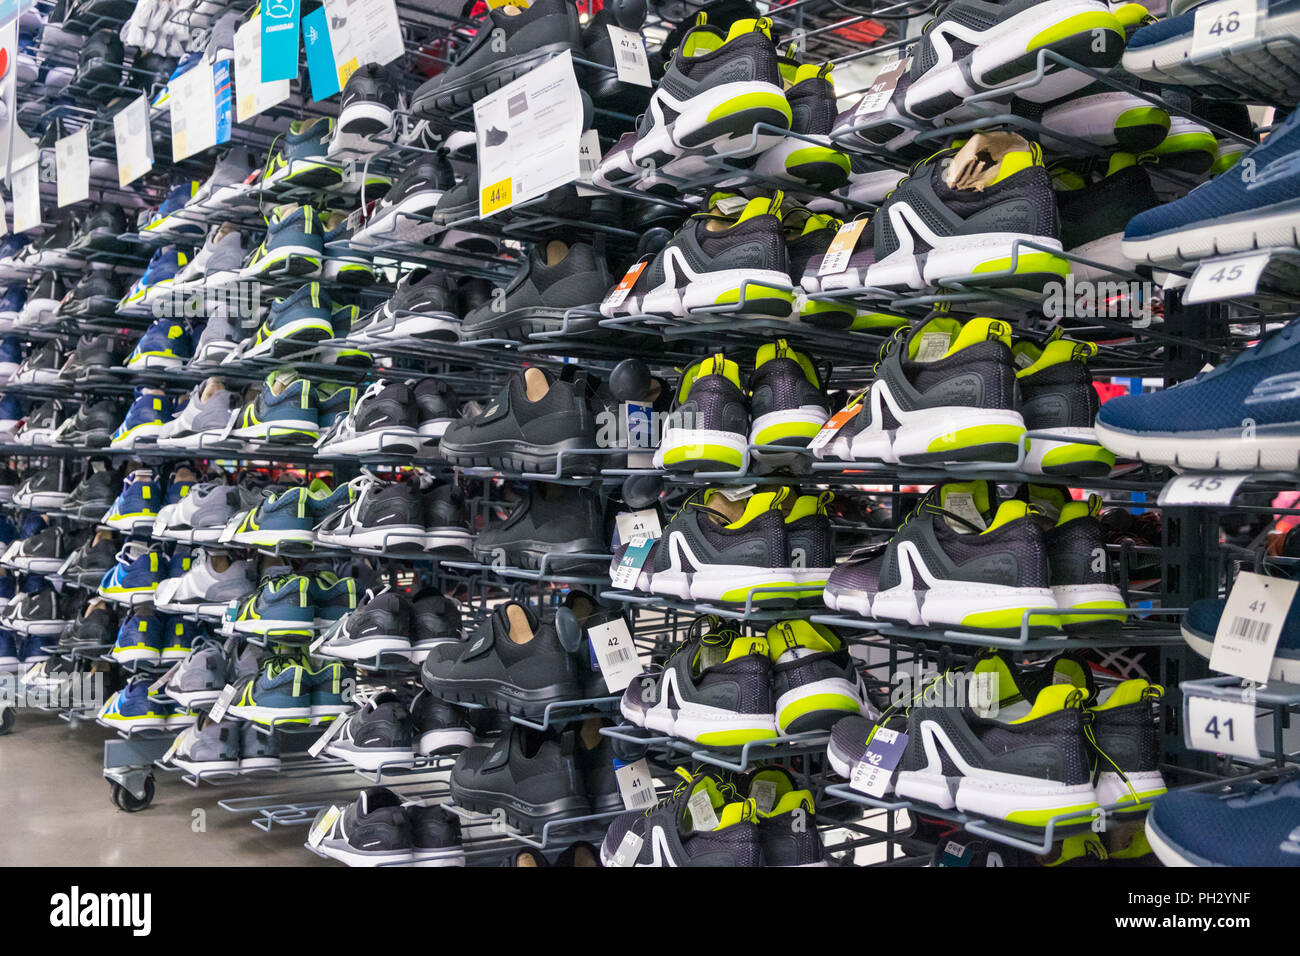 Row of trainers, sneakers on display in a decathlon shop, uk Stock Photo -  Alamy